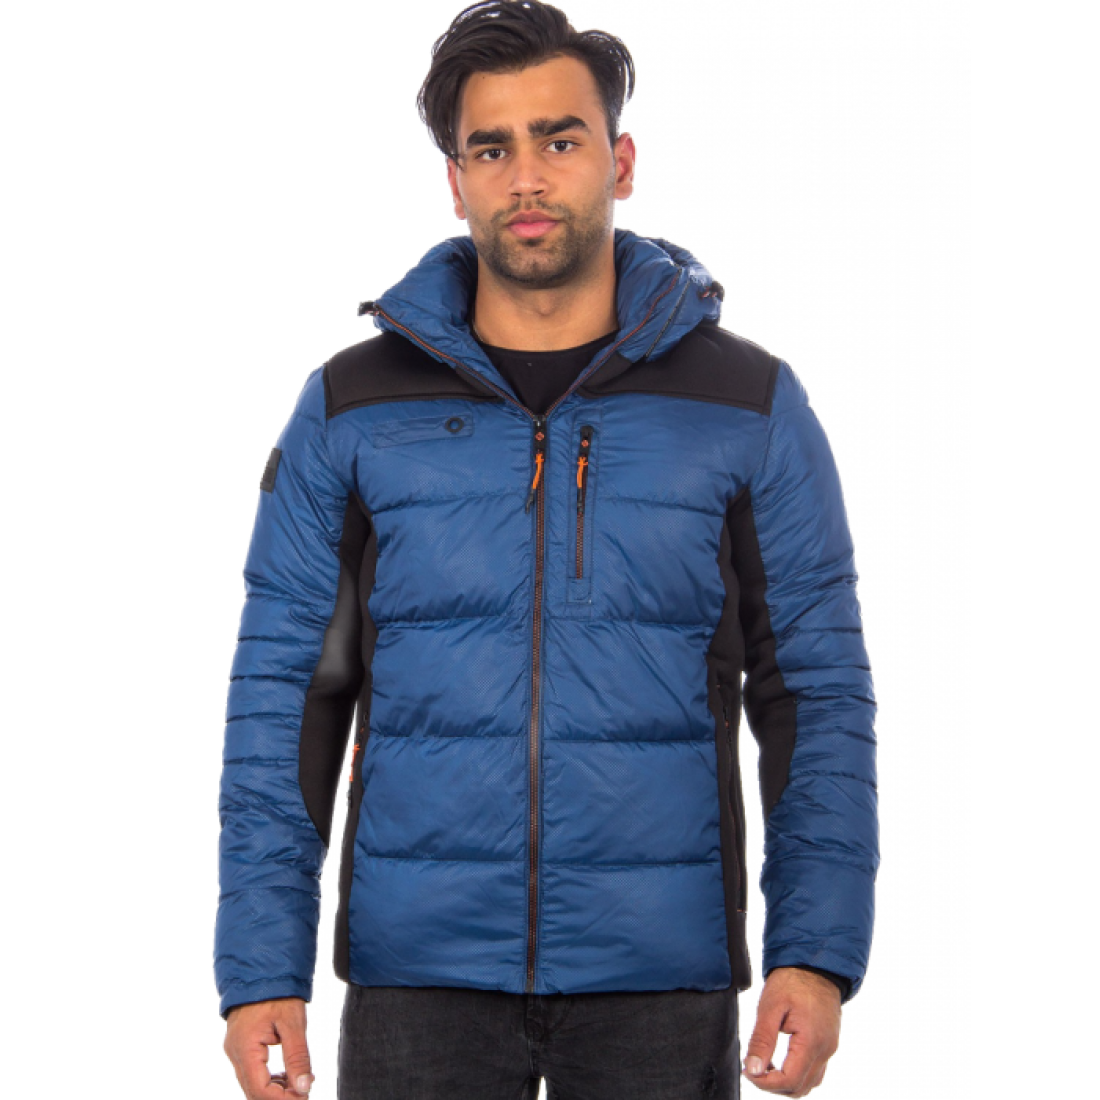 Eco down jacket by Point Zero on sale Sales Up 70% | 2020 must-have